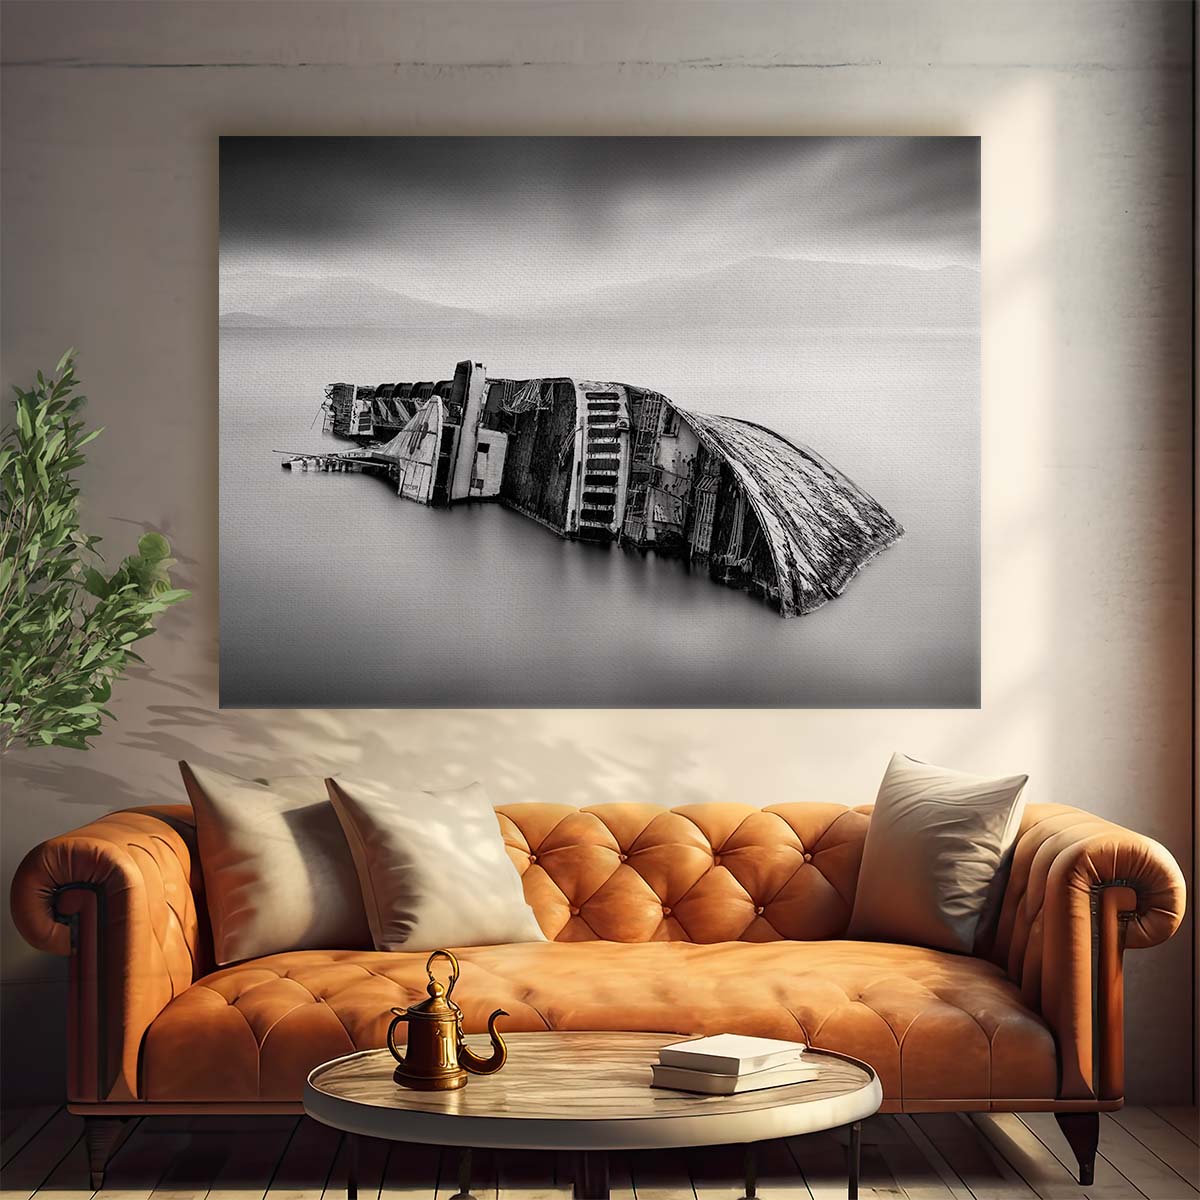 Silky Seascape Shipwreck Monochrome Wall Art by Luxuriance Designs. Made in USA.